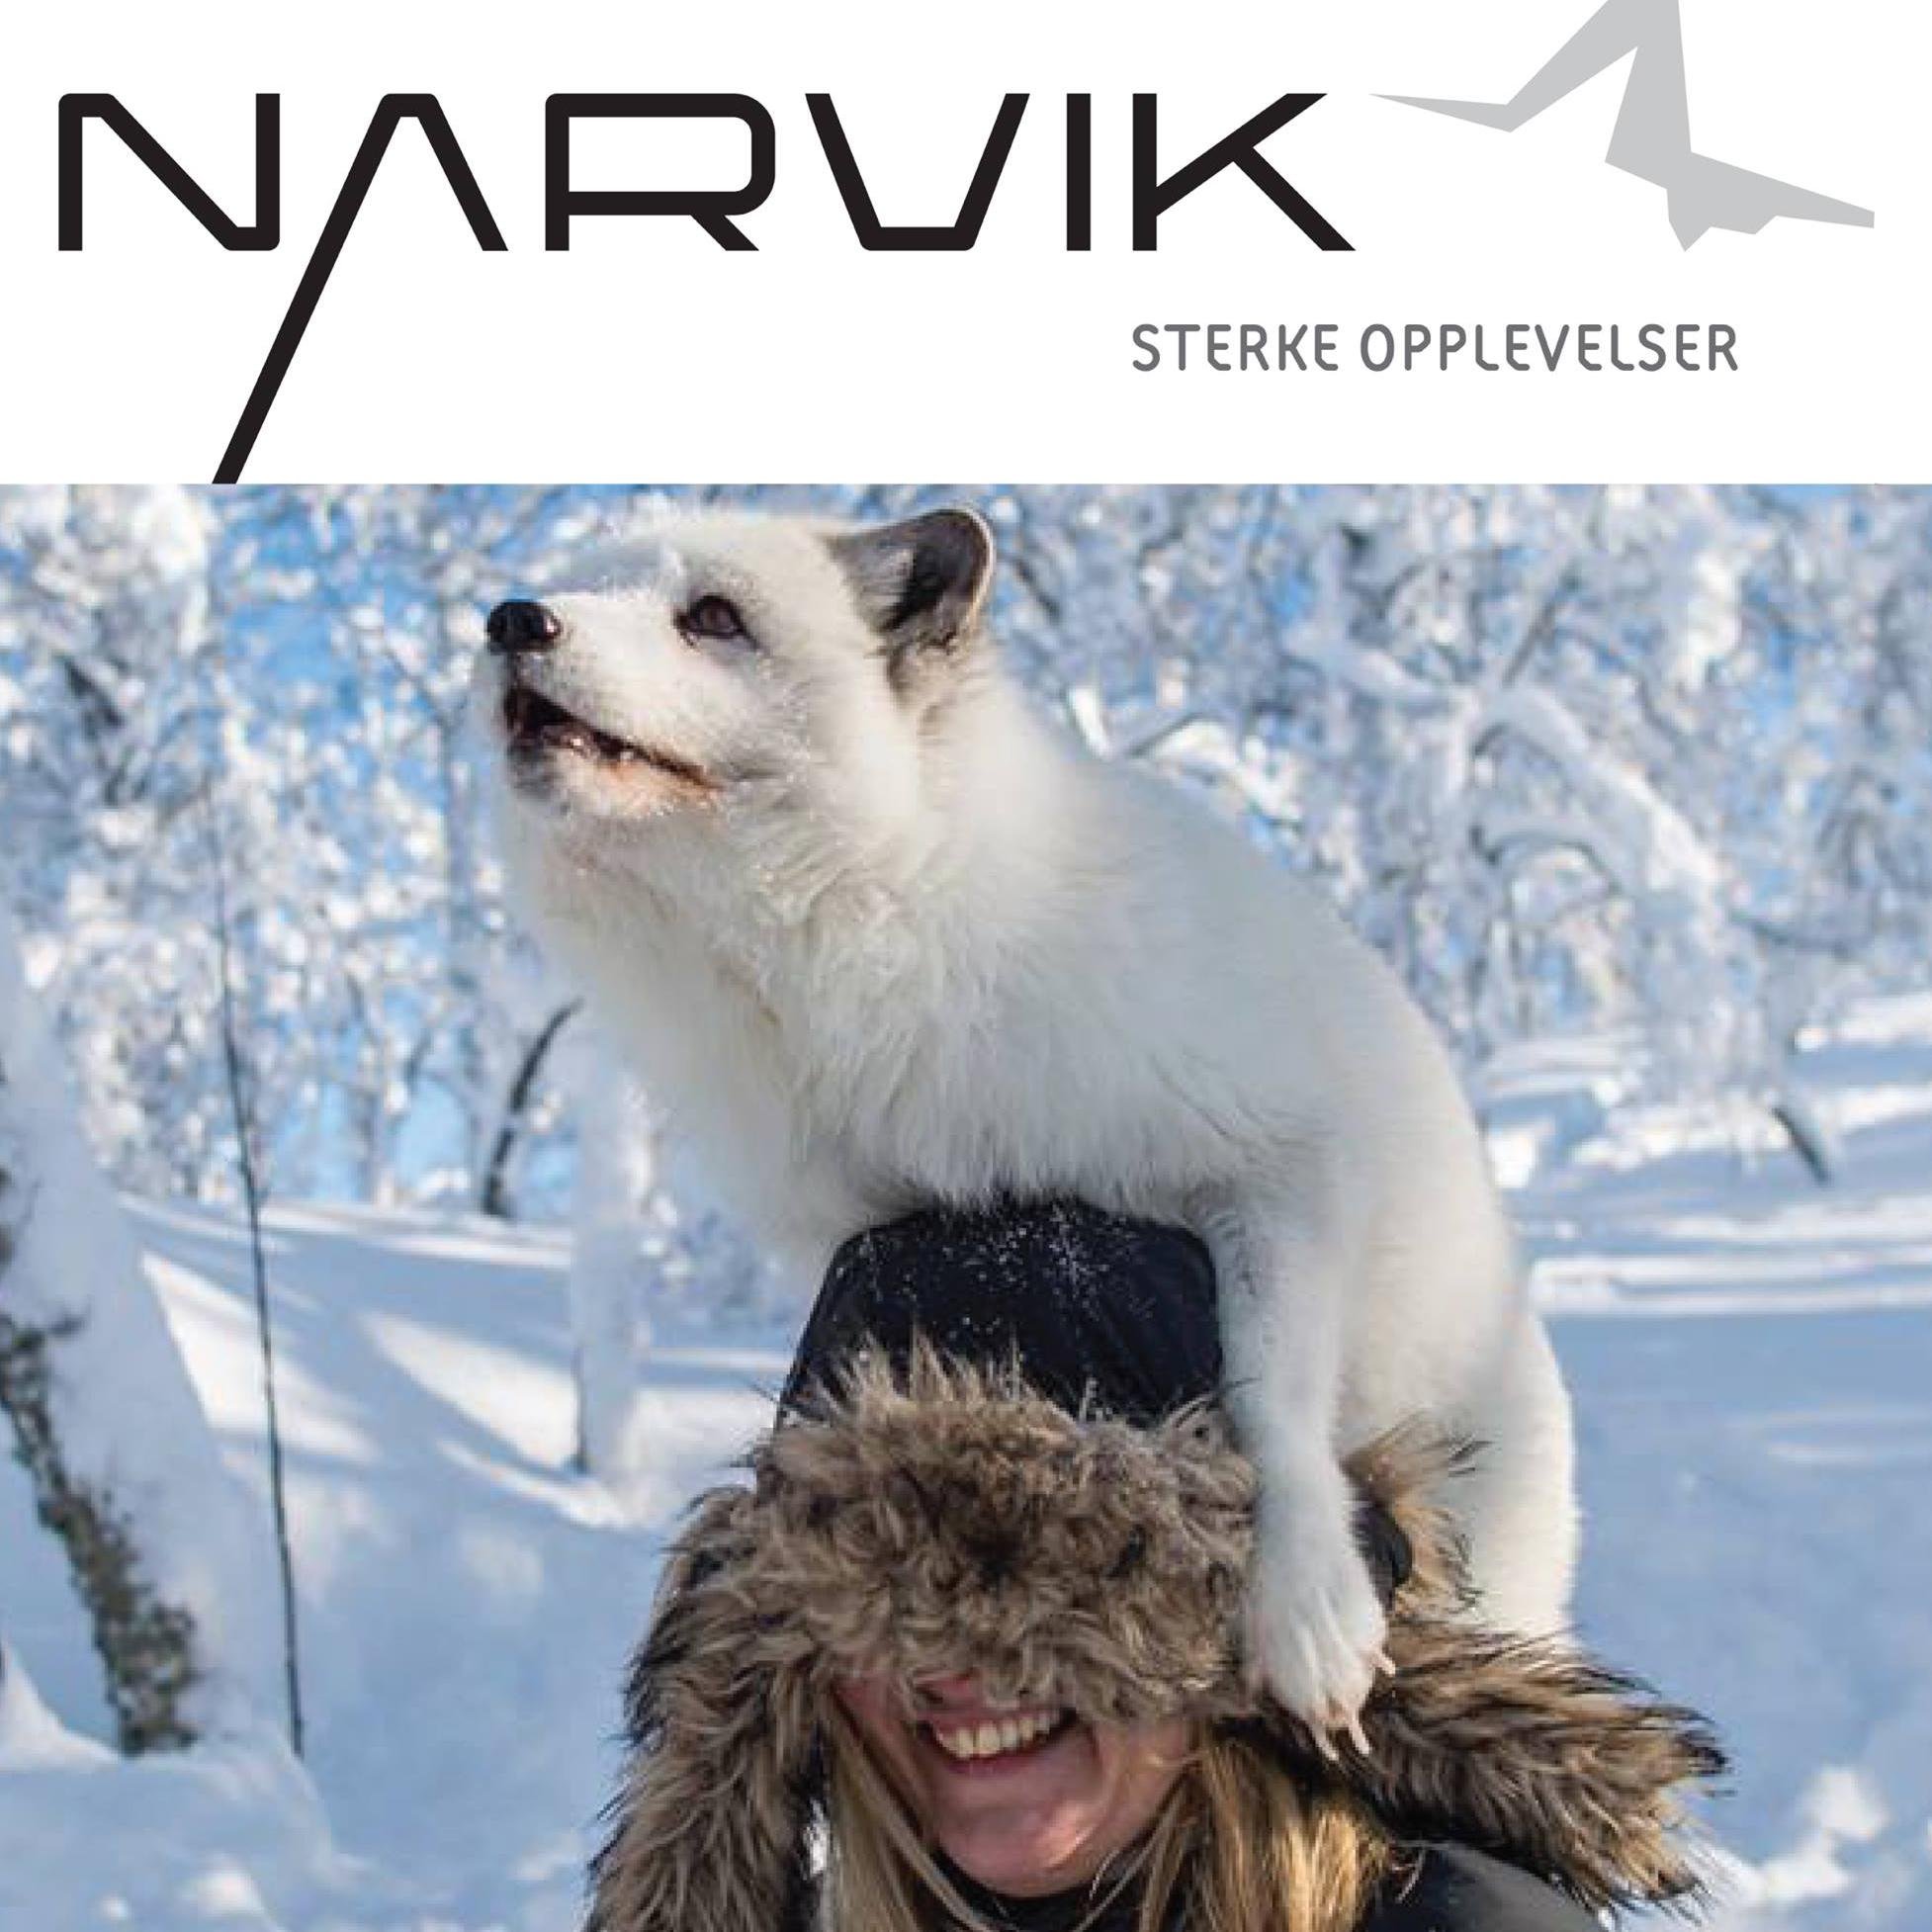 Visit Narvik is the official marketing agency for the Narvik Region. We promote, coordinate and facilitate for all your needs. Welcome to the Narvik region!